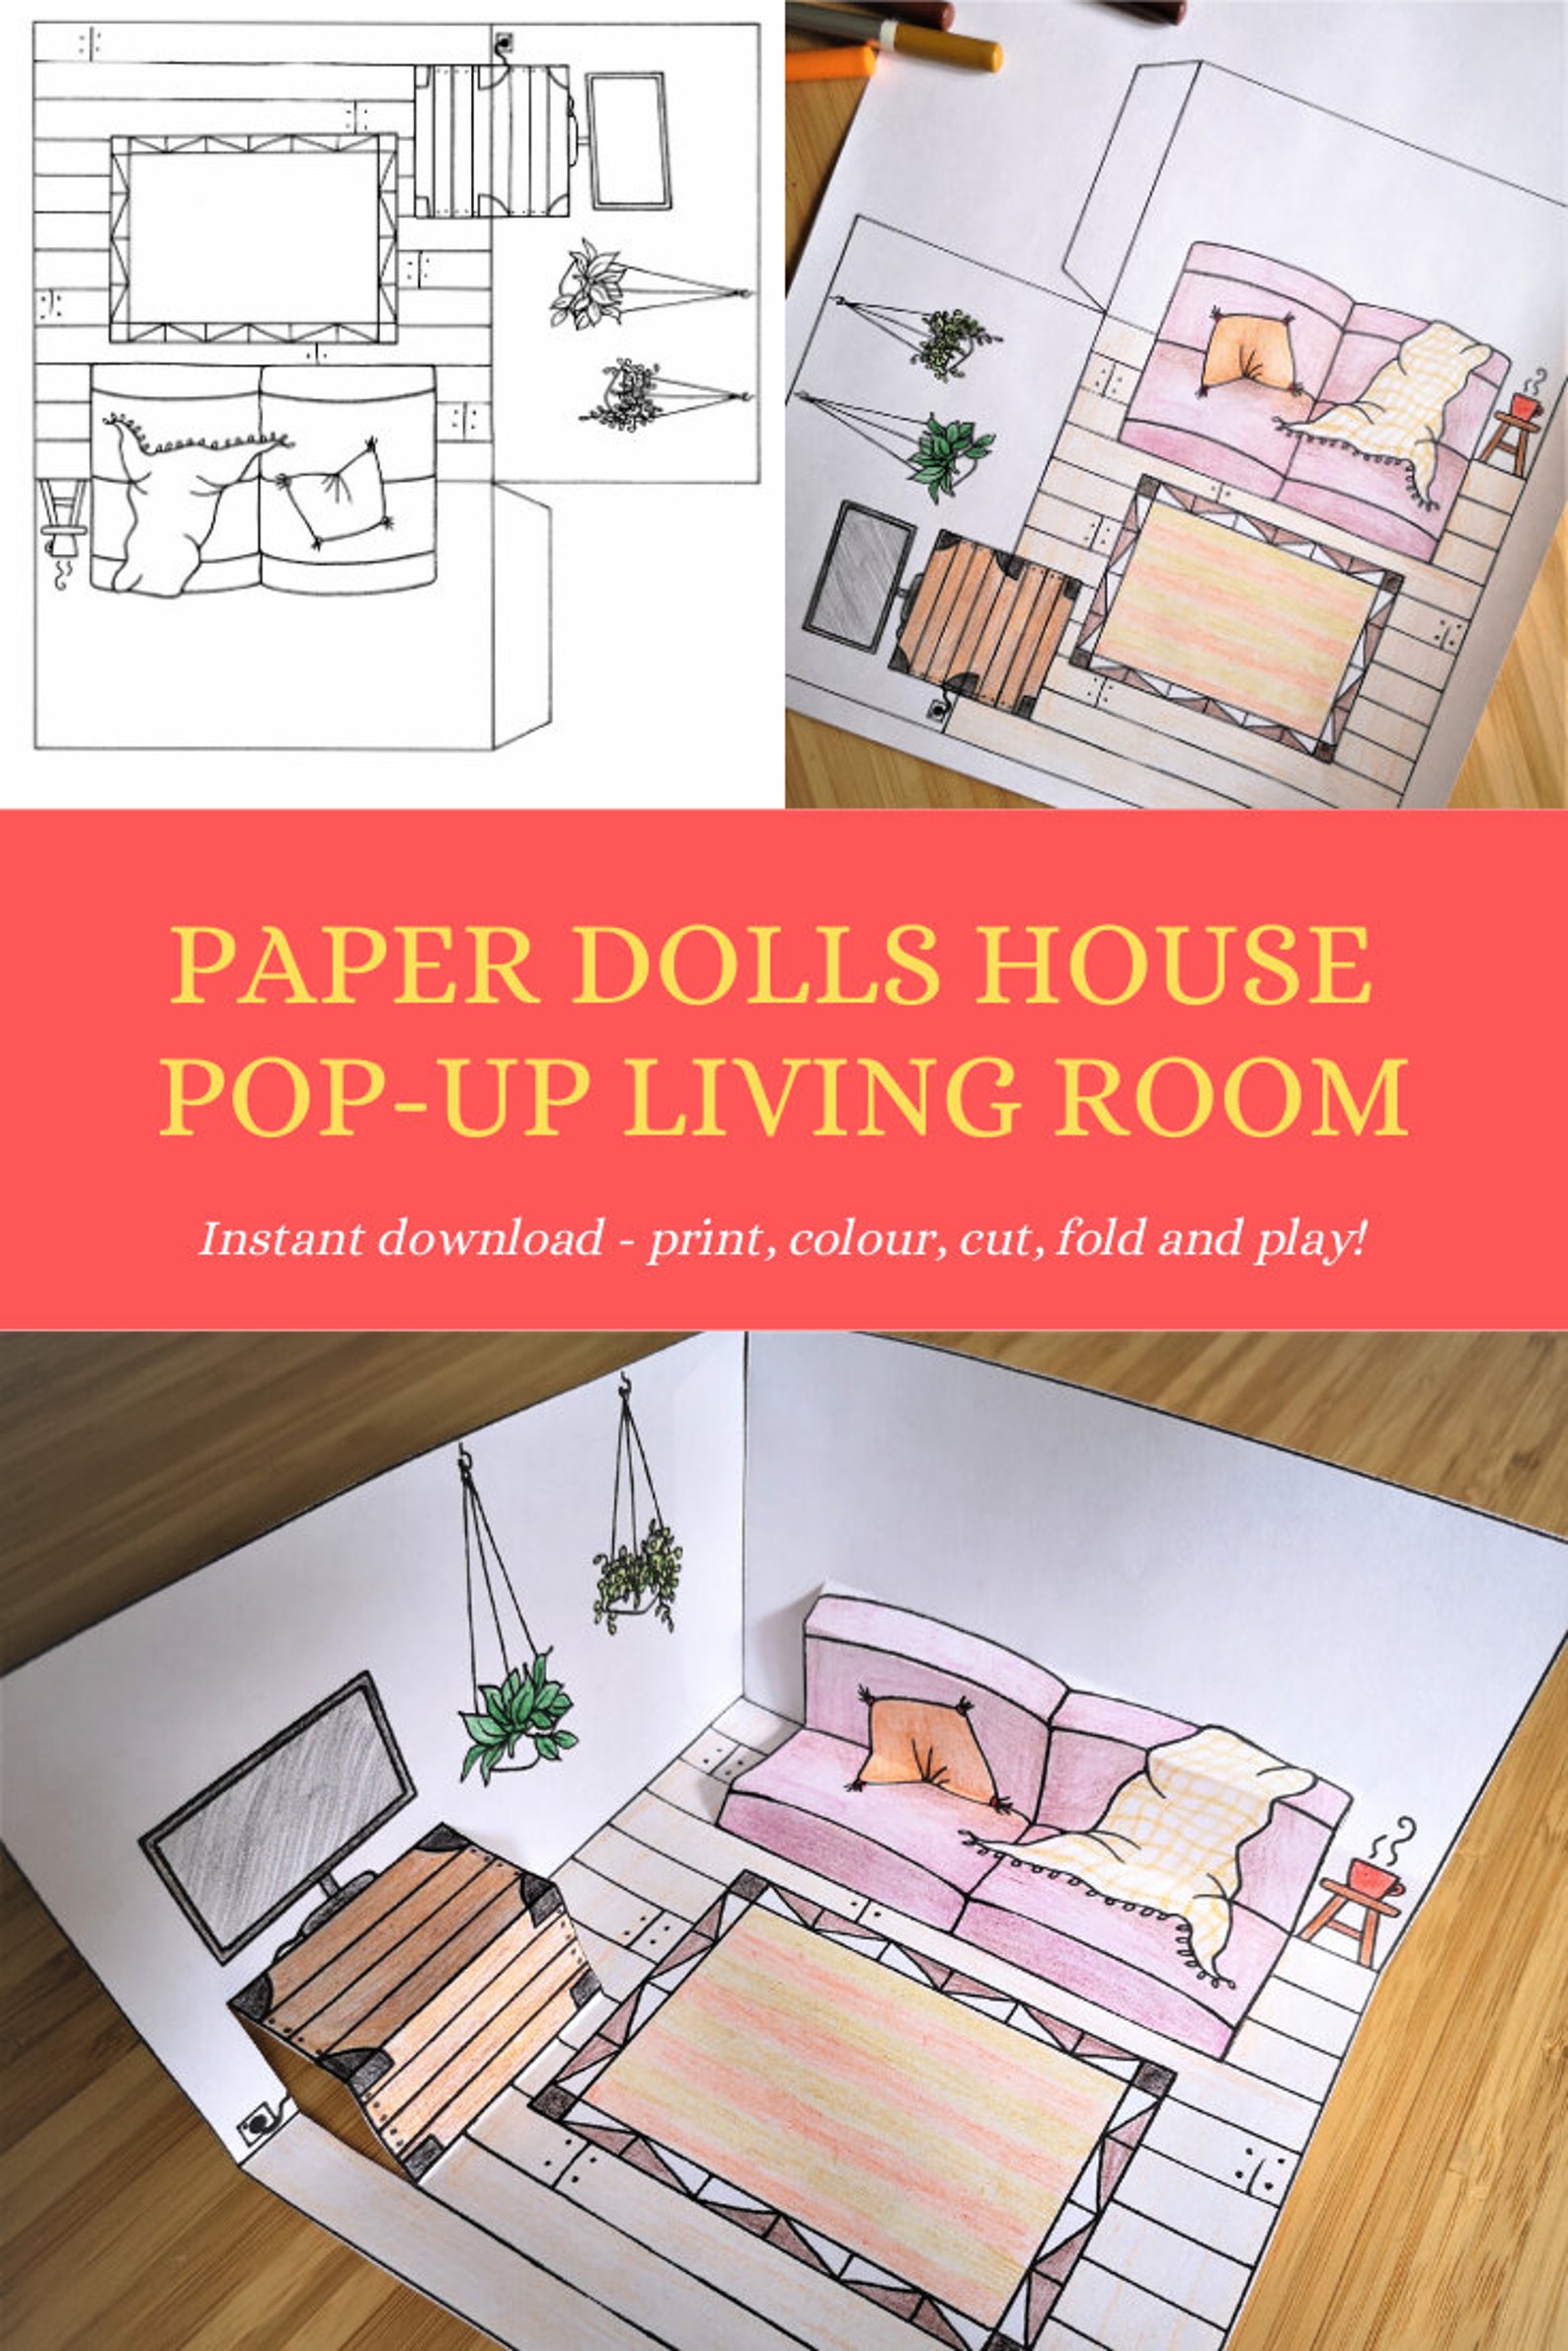 Pop-up paper dolls house living room printable with plants | Etsy